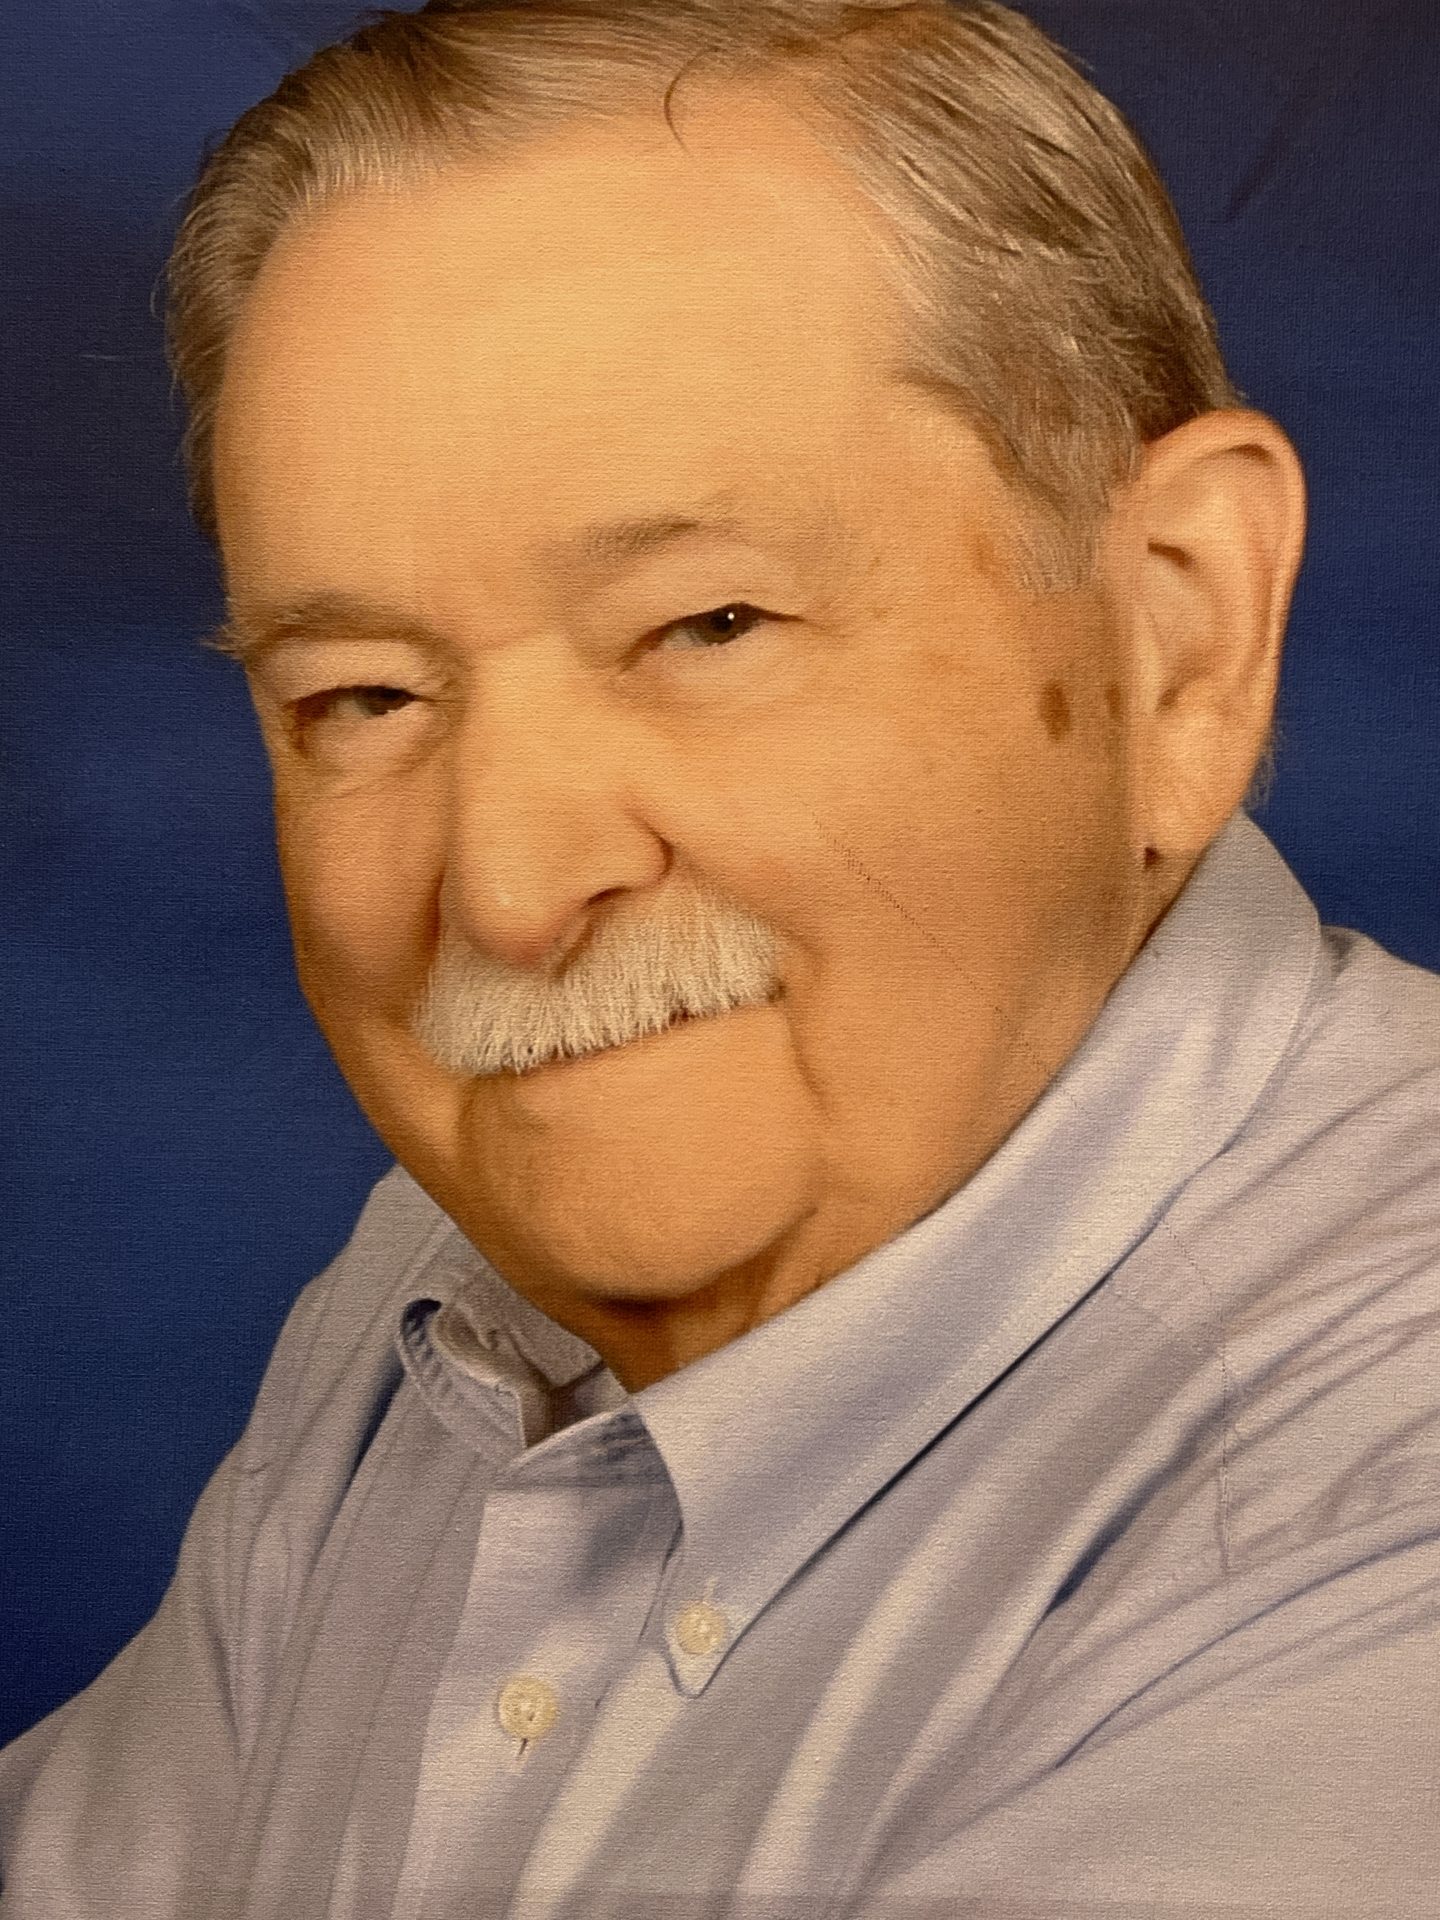 Horace Richard Barndt, 89, of Summerfield , Florida , passed unexpectedly away on Sunday, October 23, 2022.<br />
Originally from Lakebridge, NJ. He was the beloved husband of Diane Wischet-Barndt. Devoted father of Brian Barndt. Adored Grandfather of Laura and Rachel Barndt. He served in the United States Air Force during the Korean War. He was an avid Eagles fan and loved to travel as well as play pool and pickle ball. <br />
Interment Gloucester County Veterans Memorial Cemetery Williamstown, NJ on November 12th at 12pm